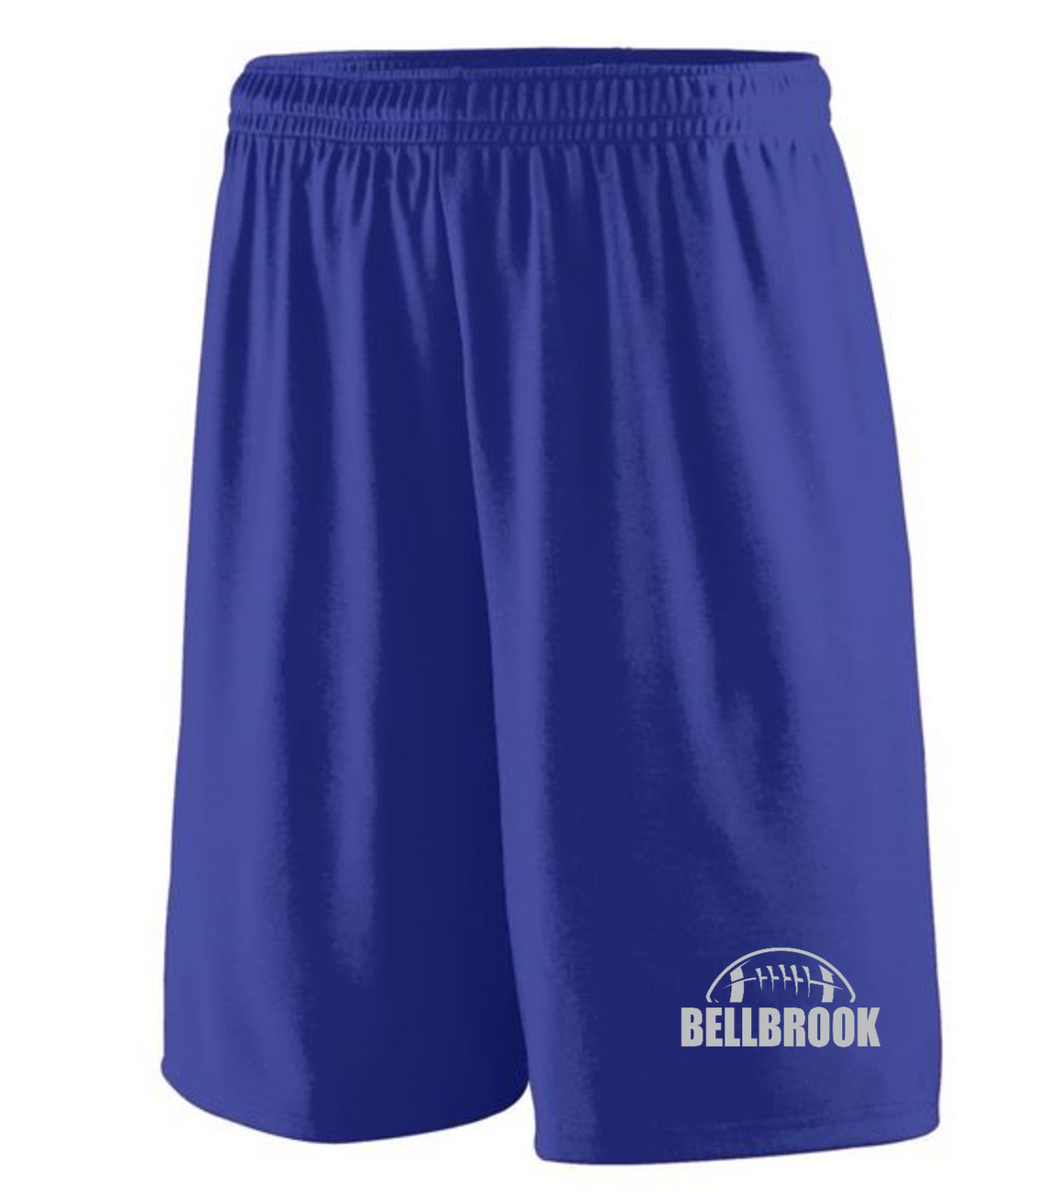 Bellbrook Middle School Football Purple Practice Shorts (Required)